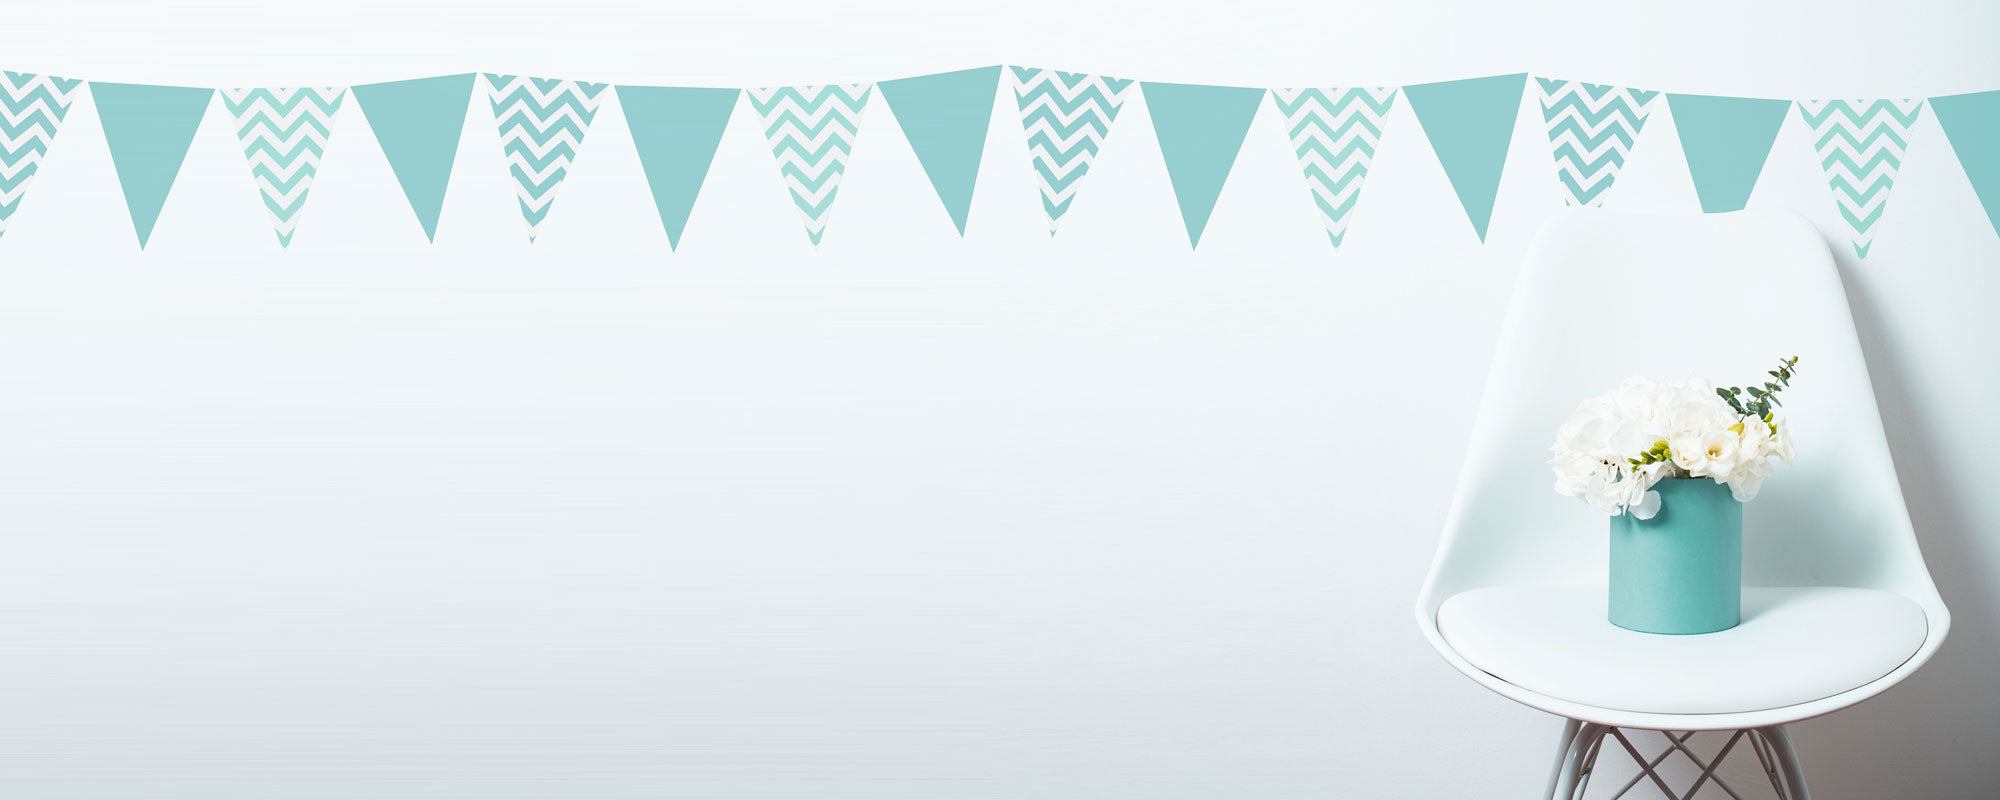 bunting stencils to mix and match from the stencil studio